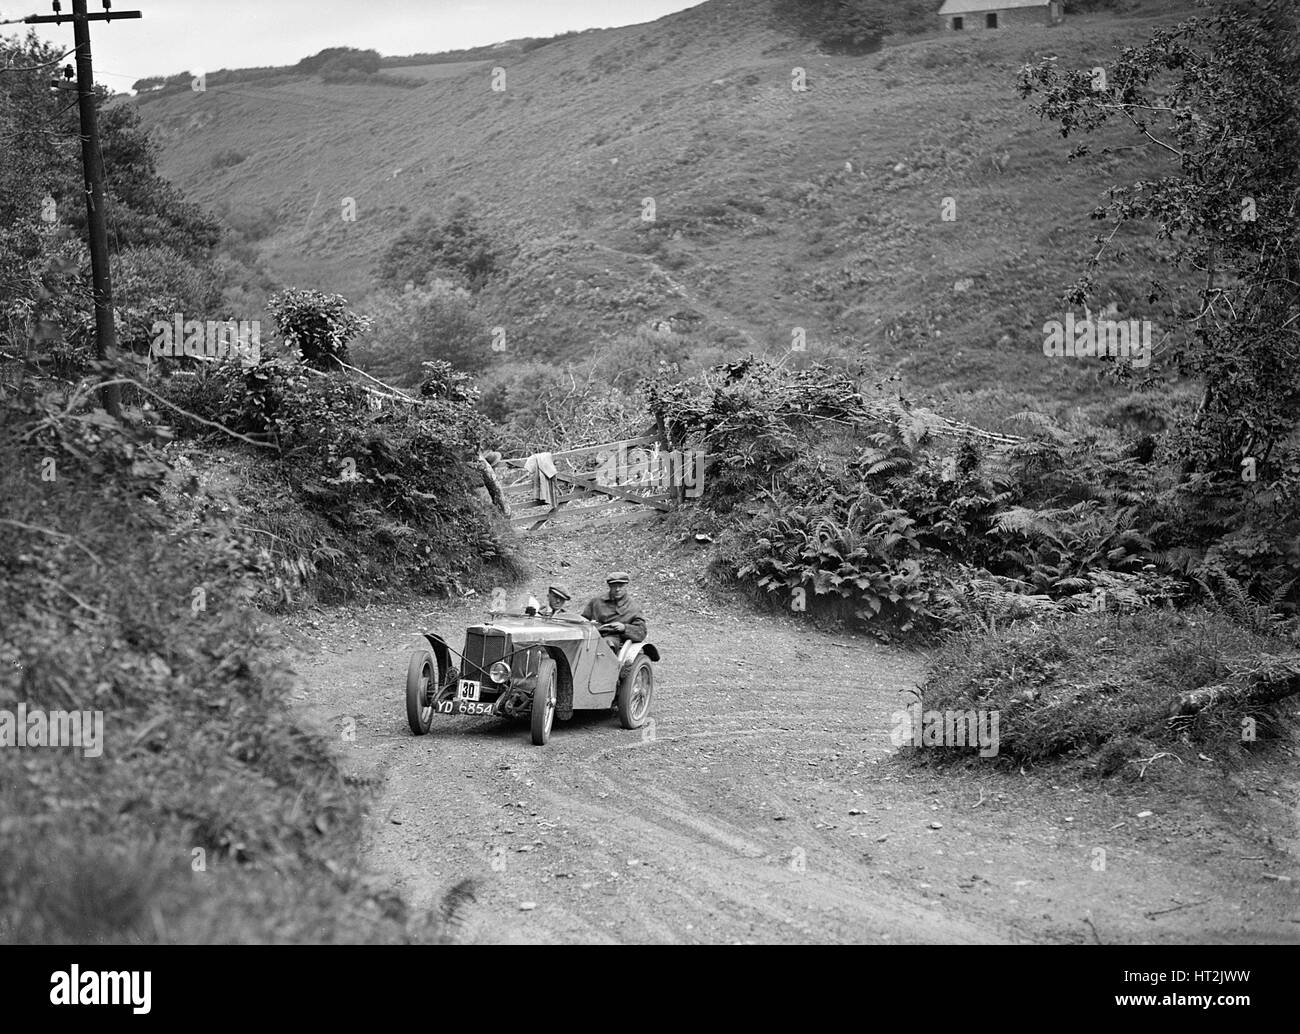 1933 MG J2 taking part in a motoring trial, late 1930s. Artist: Bill Brunell. Stock Photo